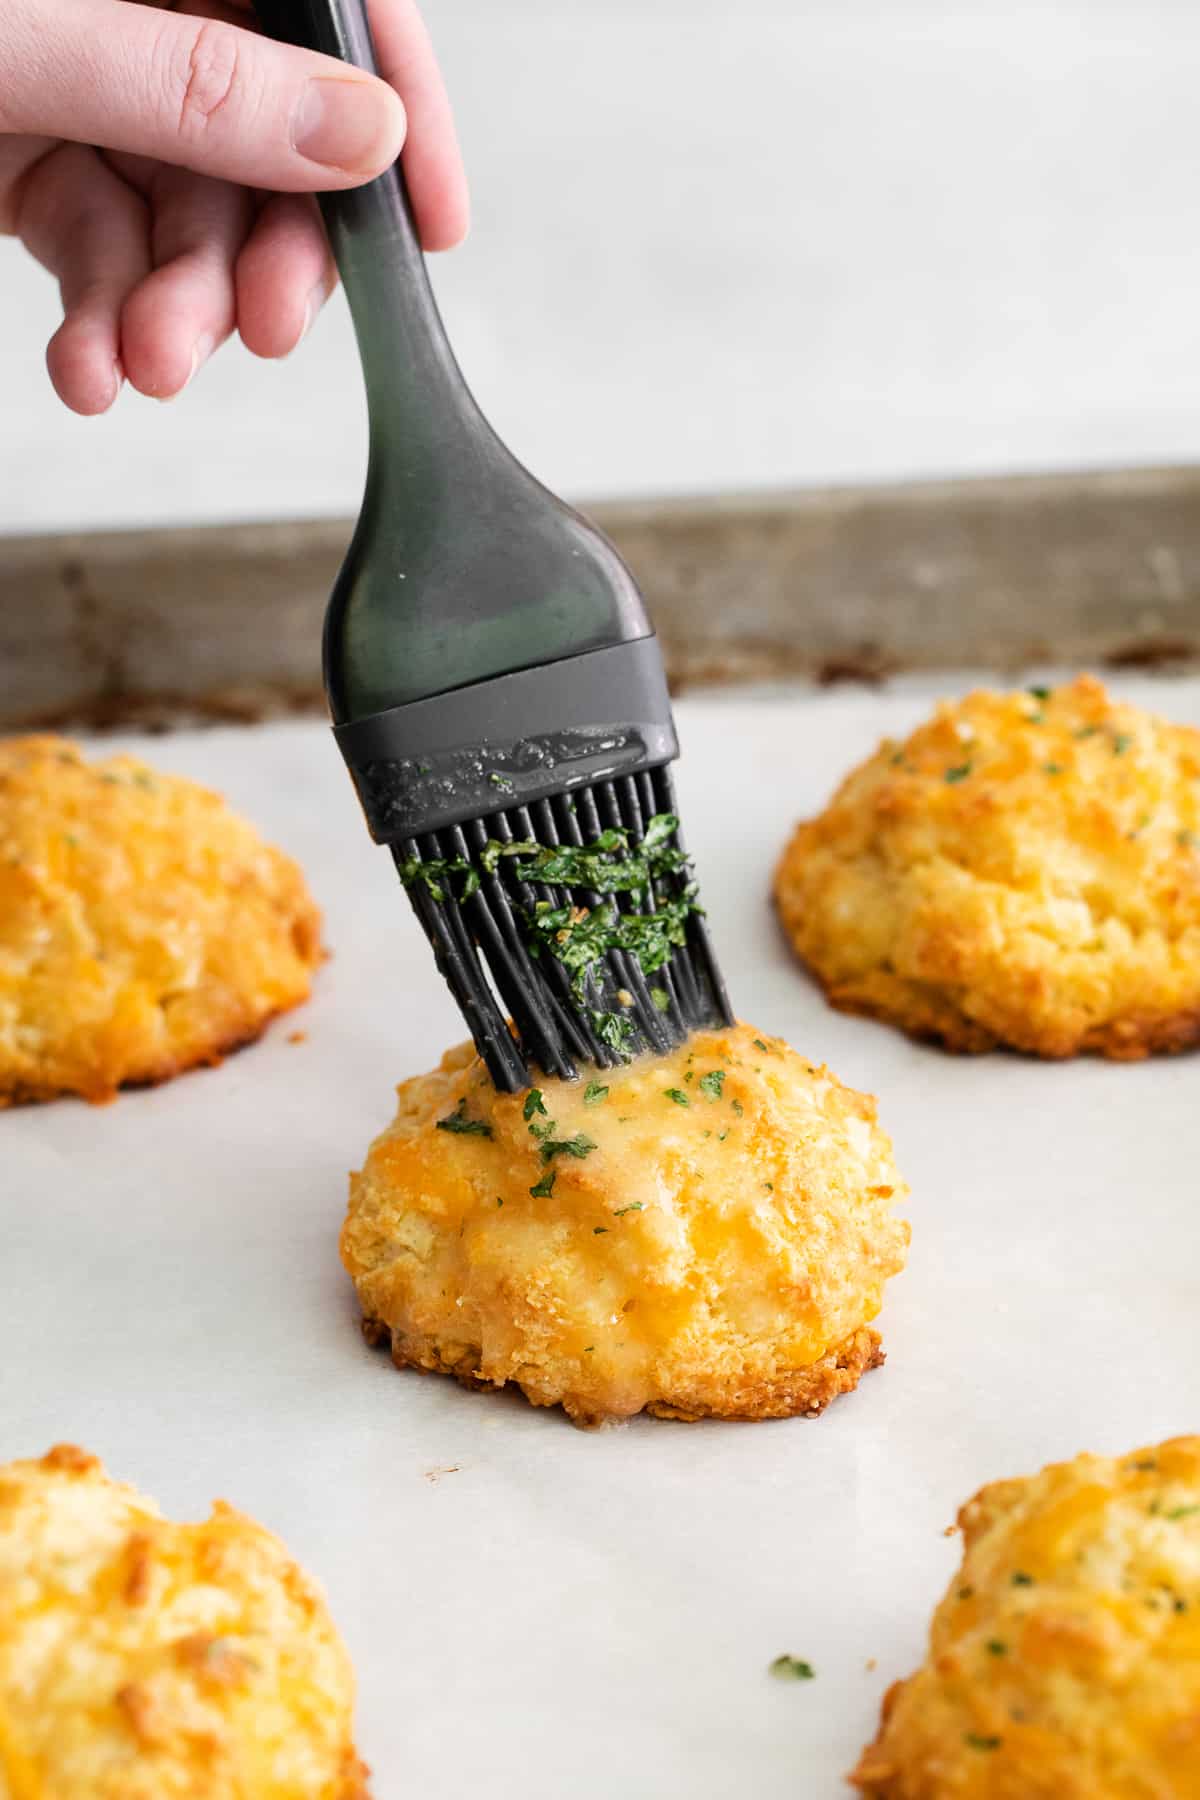 Red lobster cheddar biscuit being brushed with butter on a baking sheet.